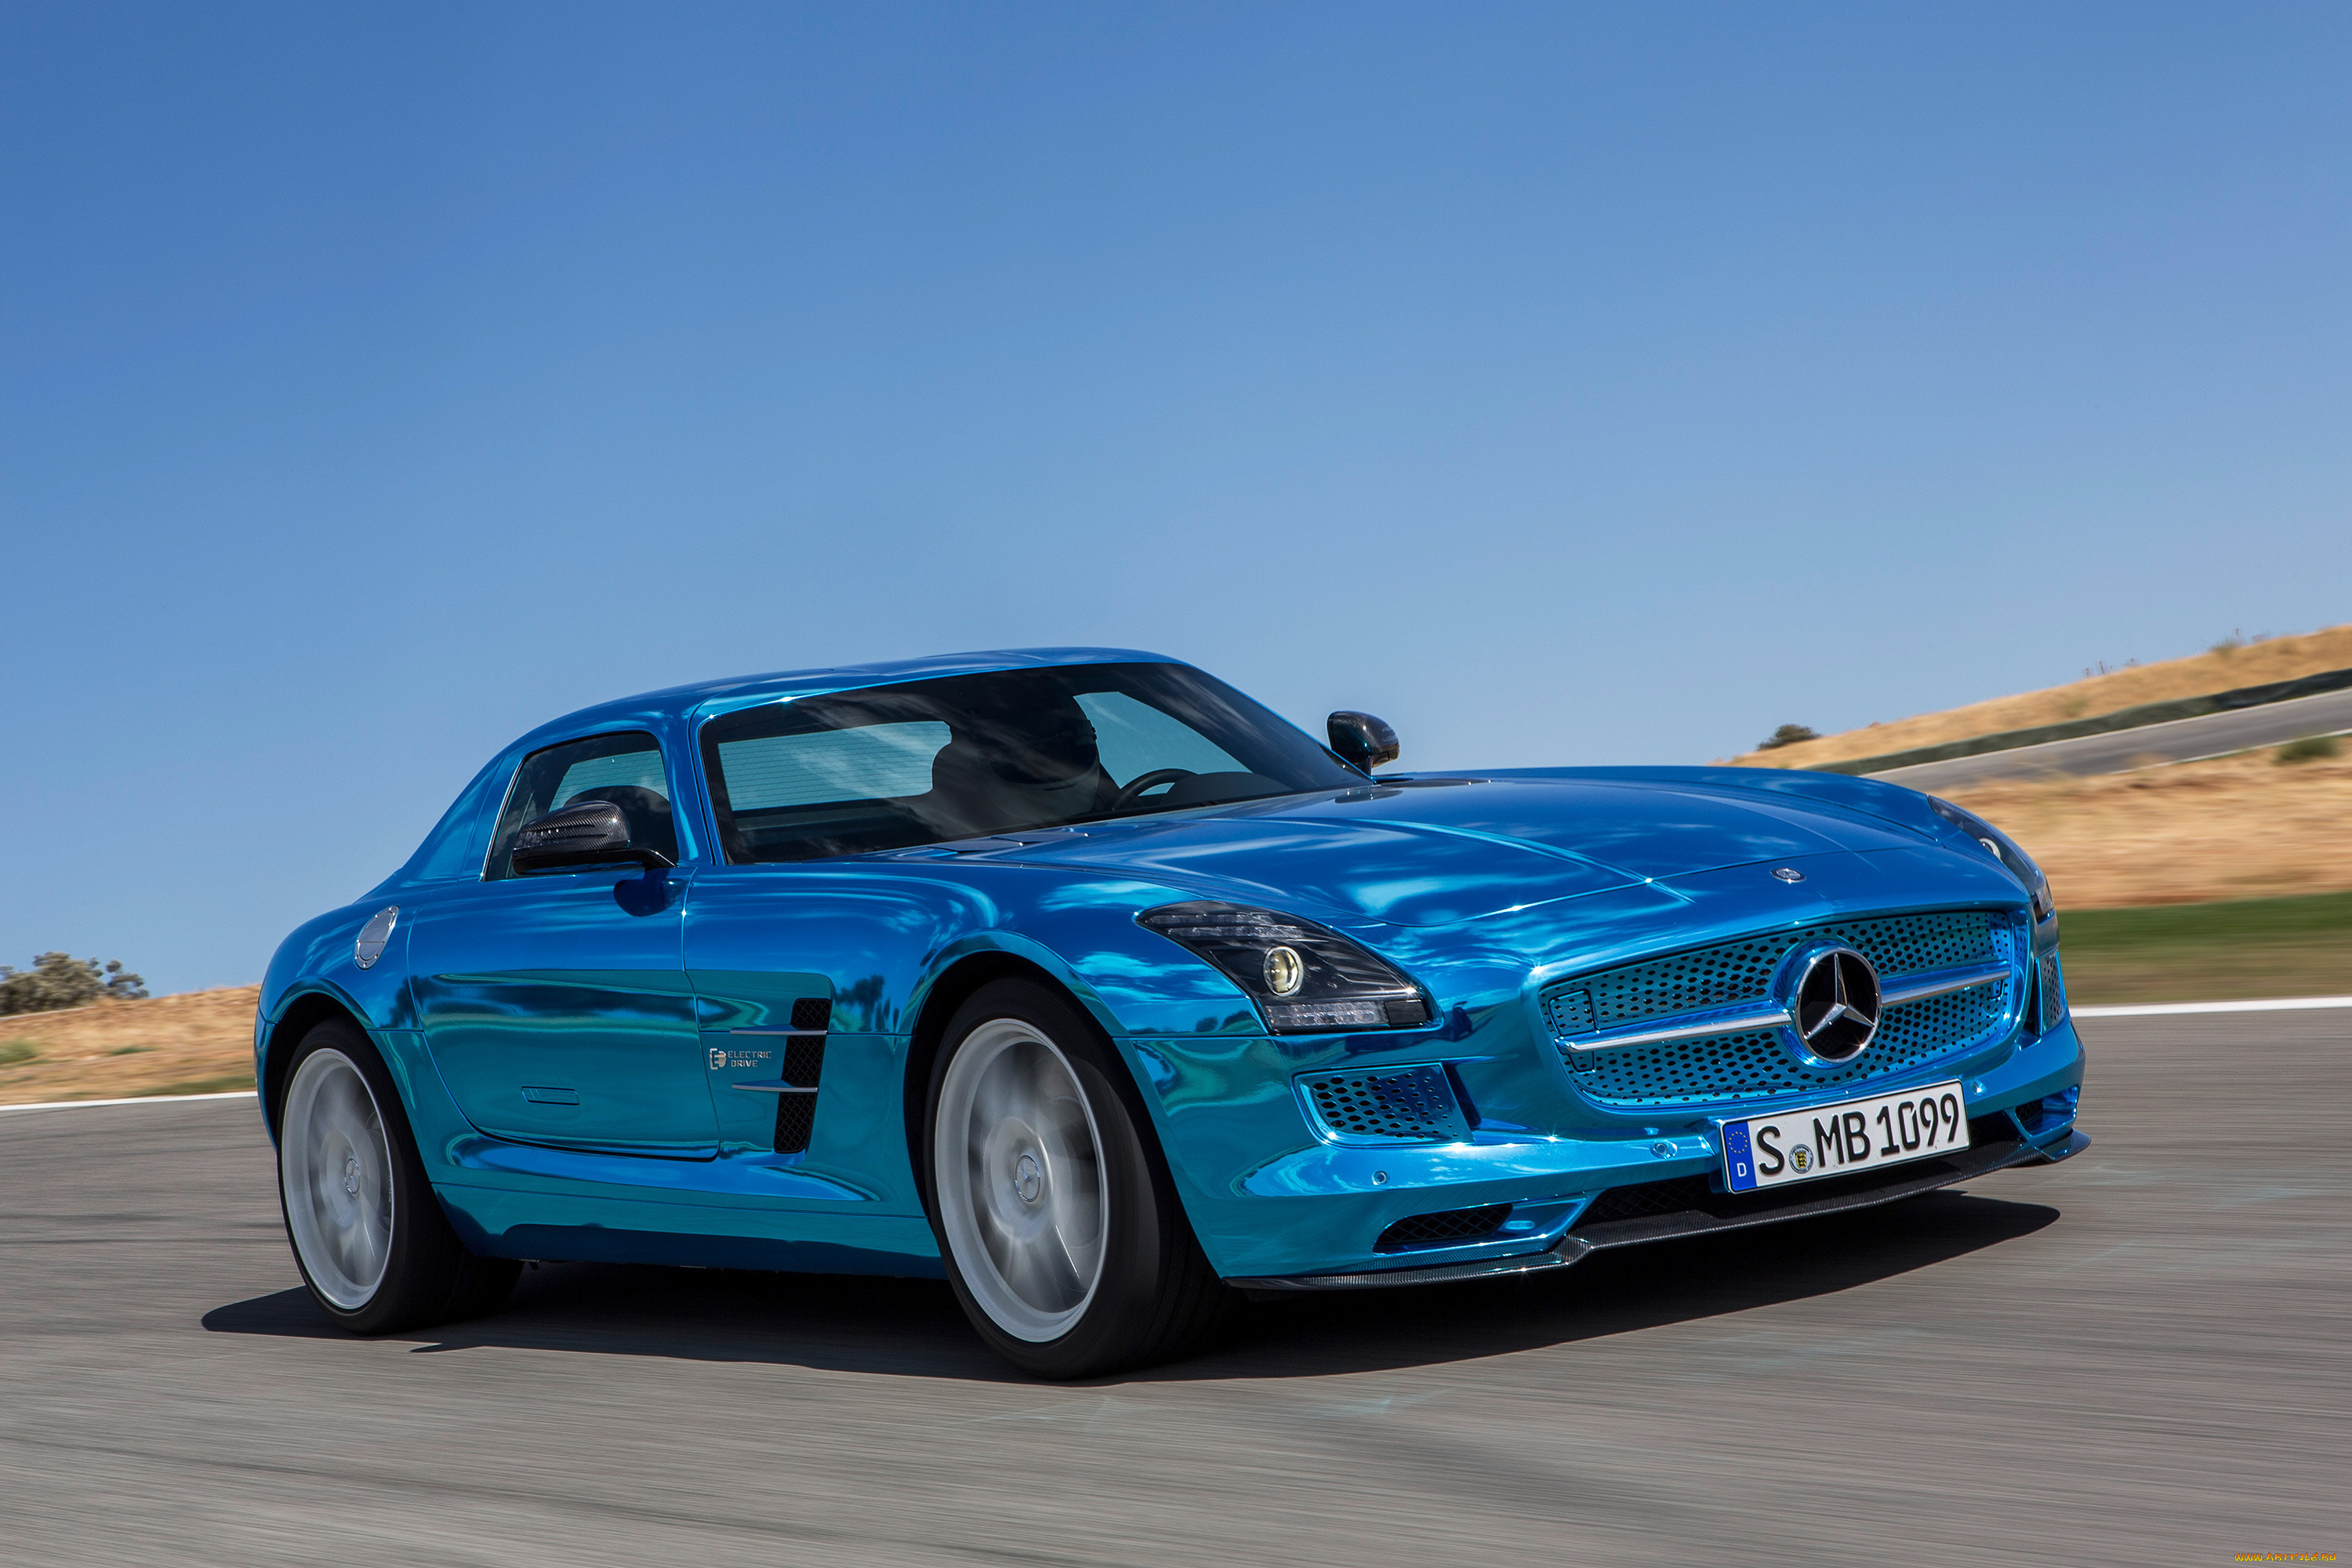 mercedes-benz sls amg coupe electric drive 2014, , mercedes-benz, amg, sls, 2014, drive, coupe, electric